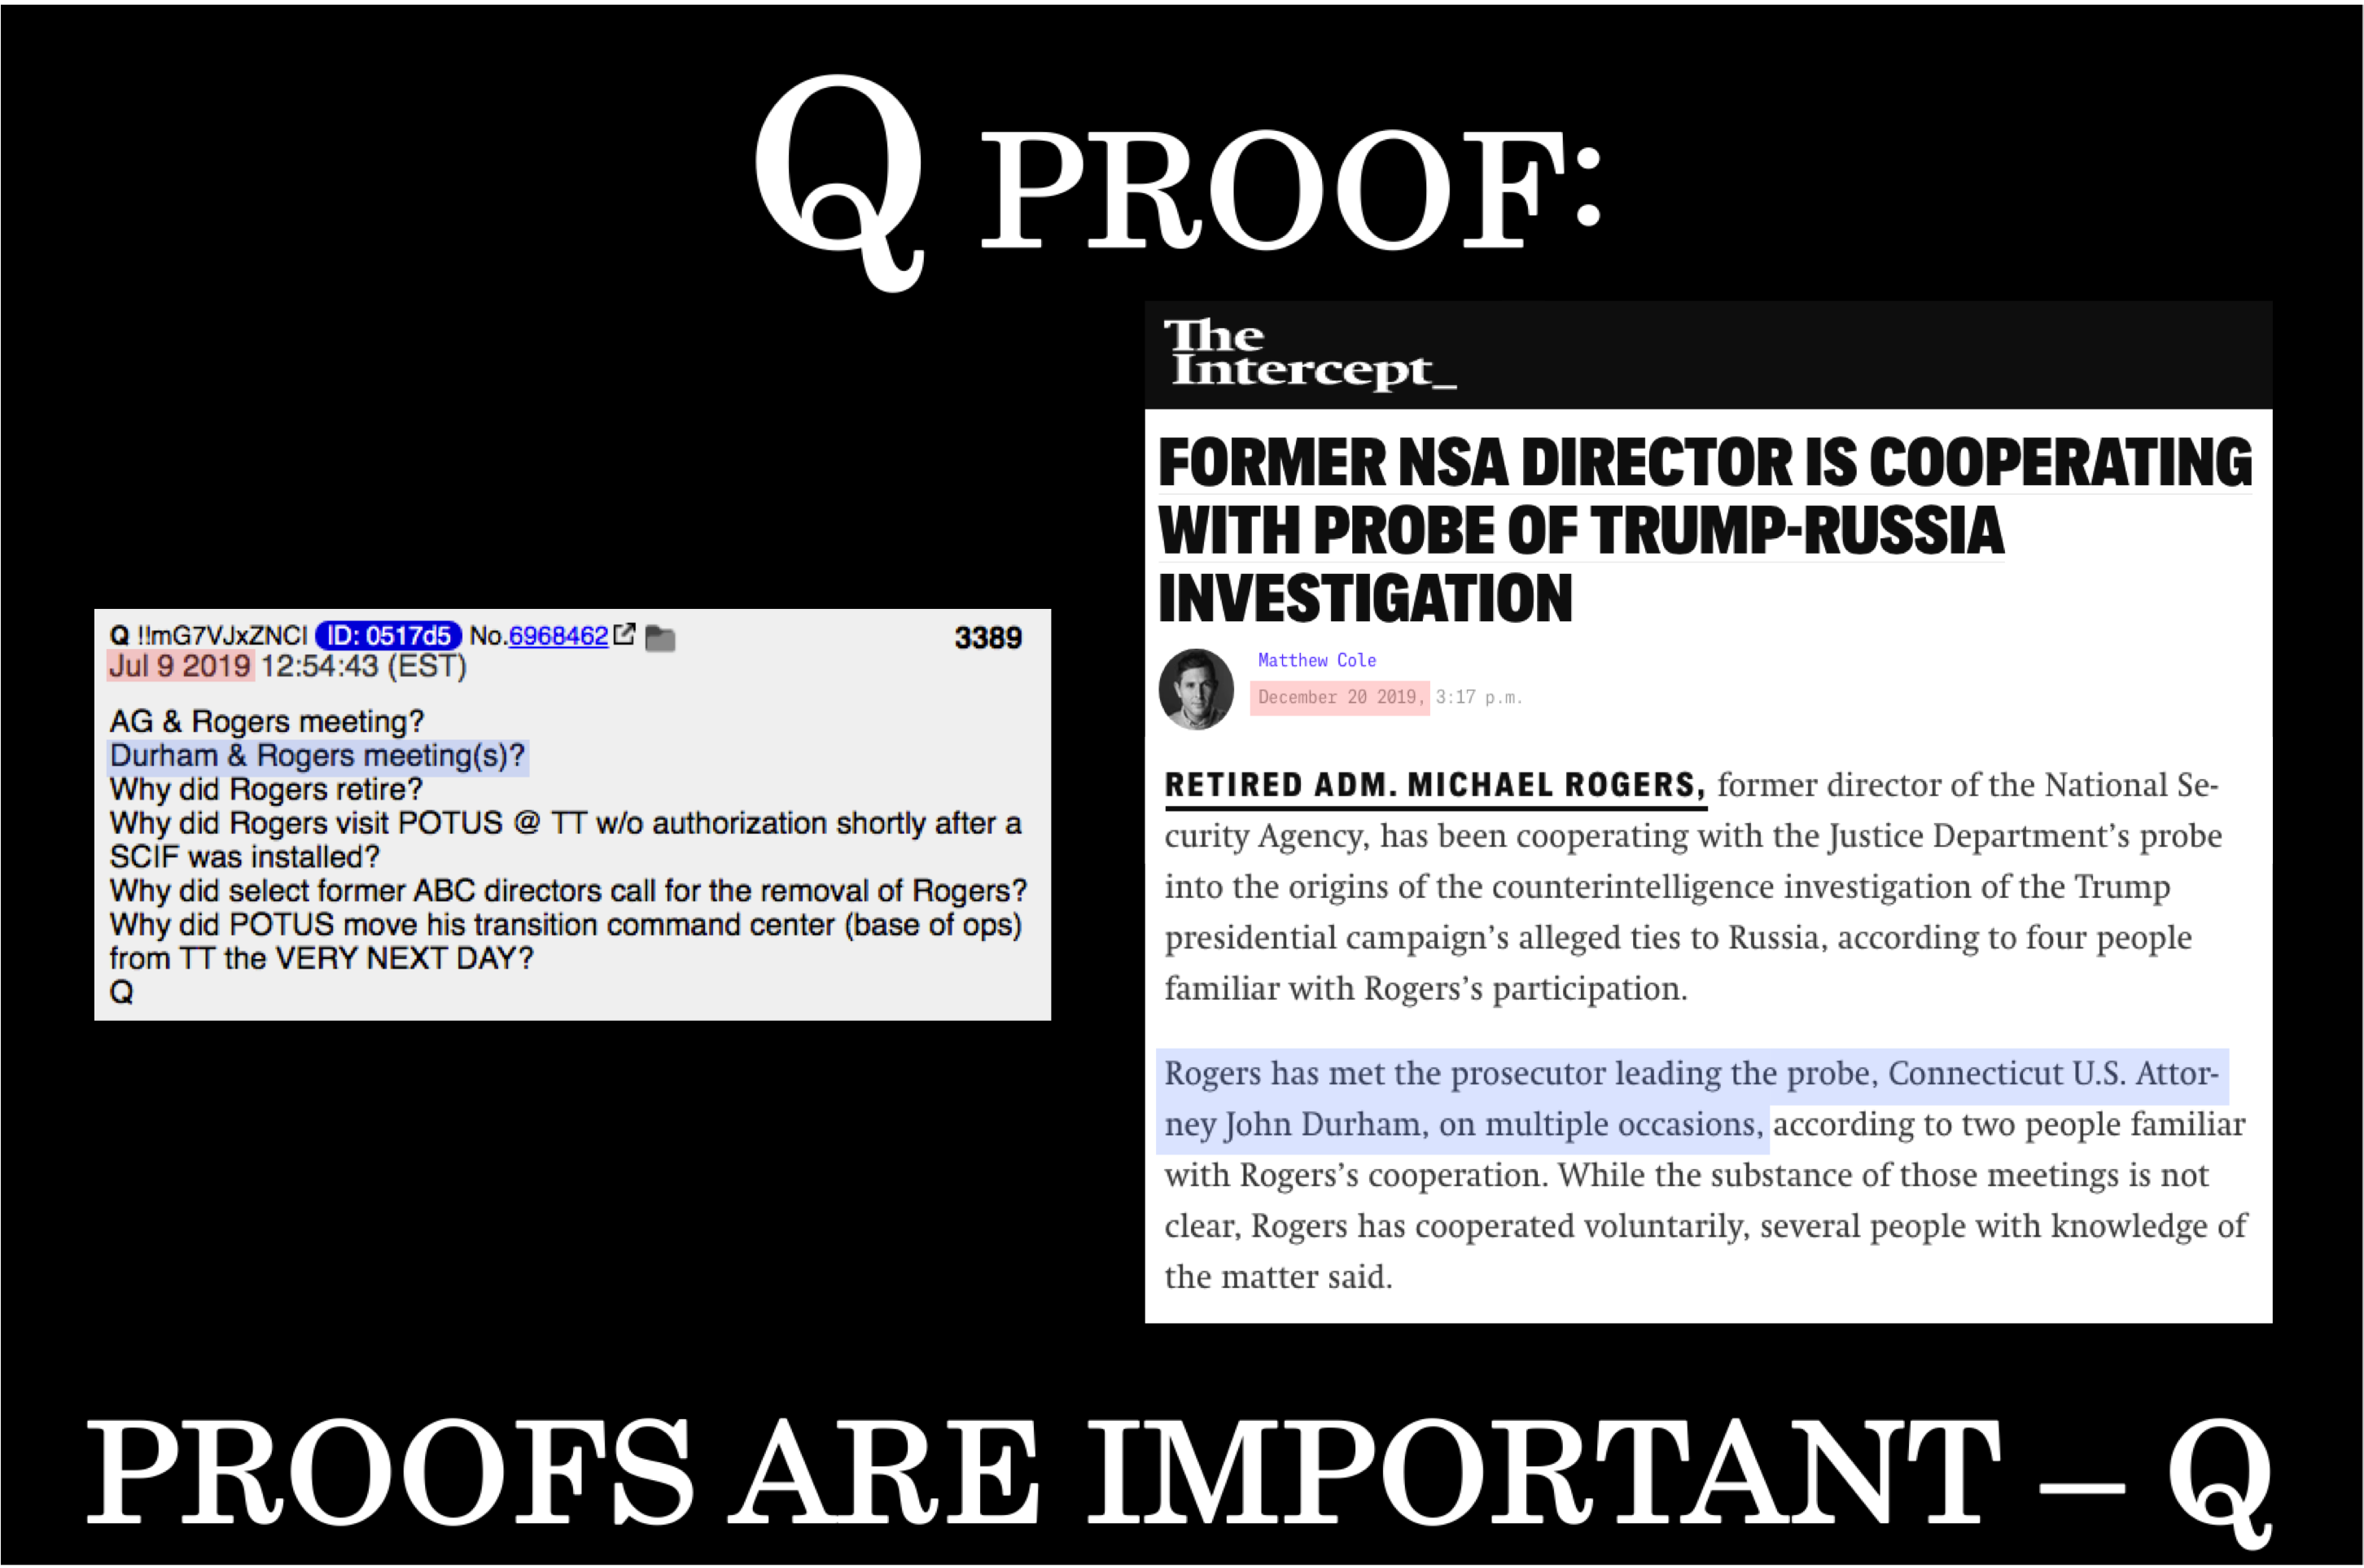 WHO IS Q, MR PRESIDENT?